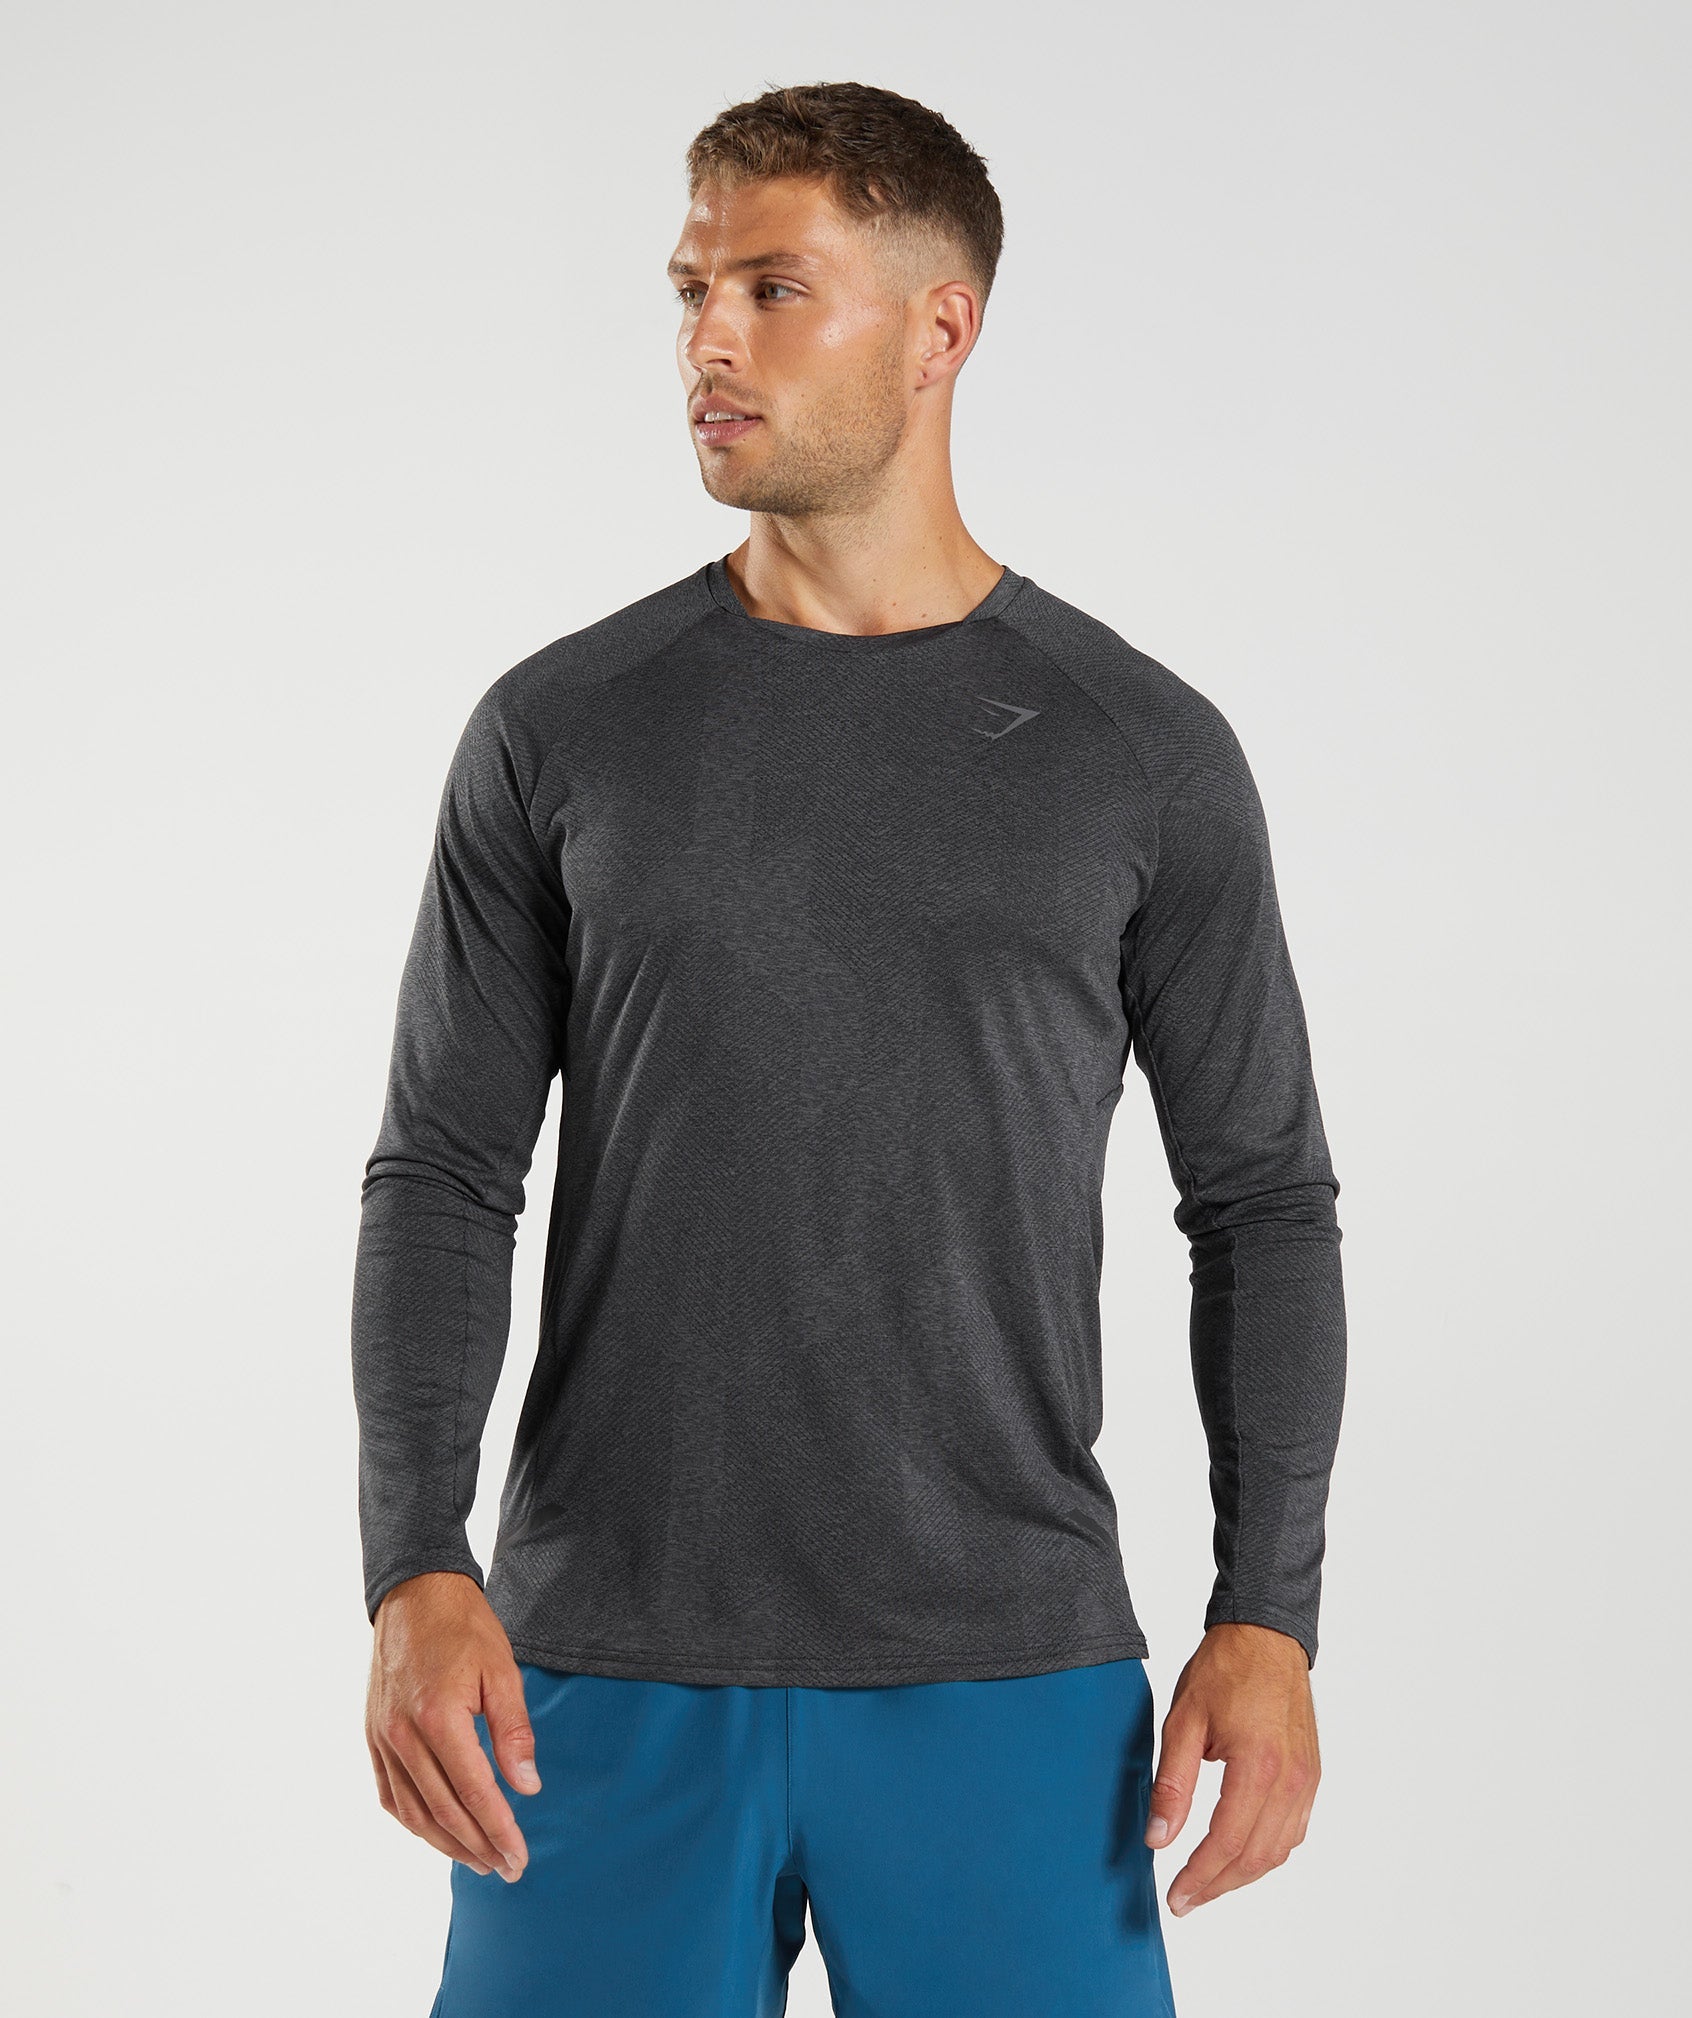 Apex Long Sleeve T-Shirt in Black/Silhouette Grey - view 1